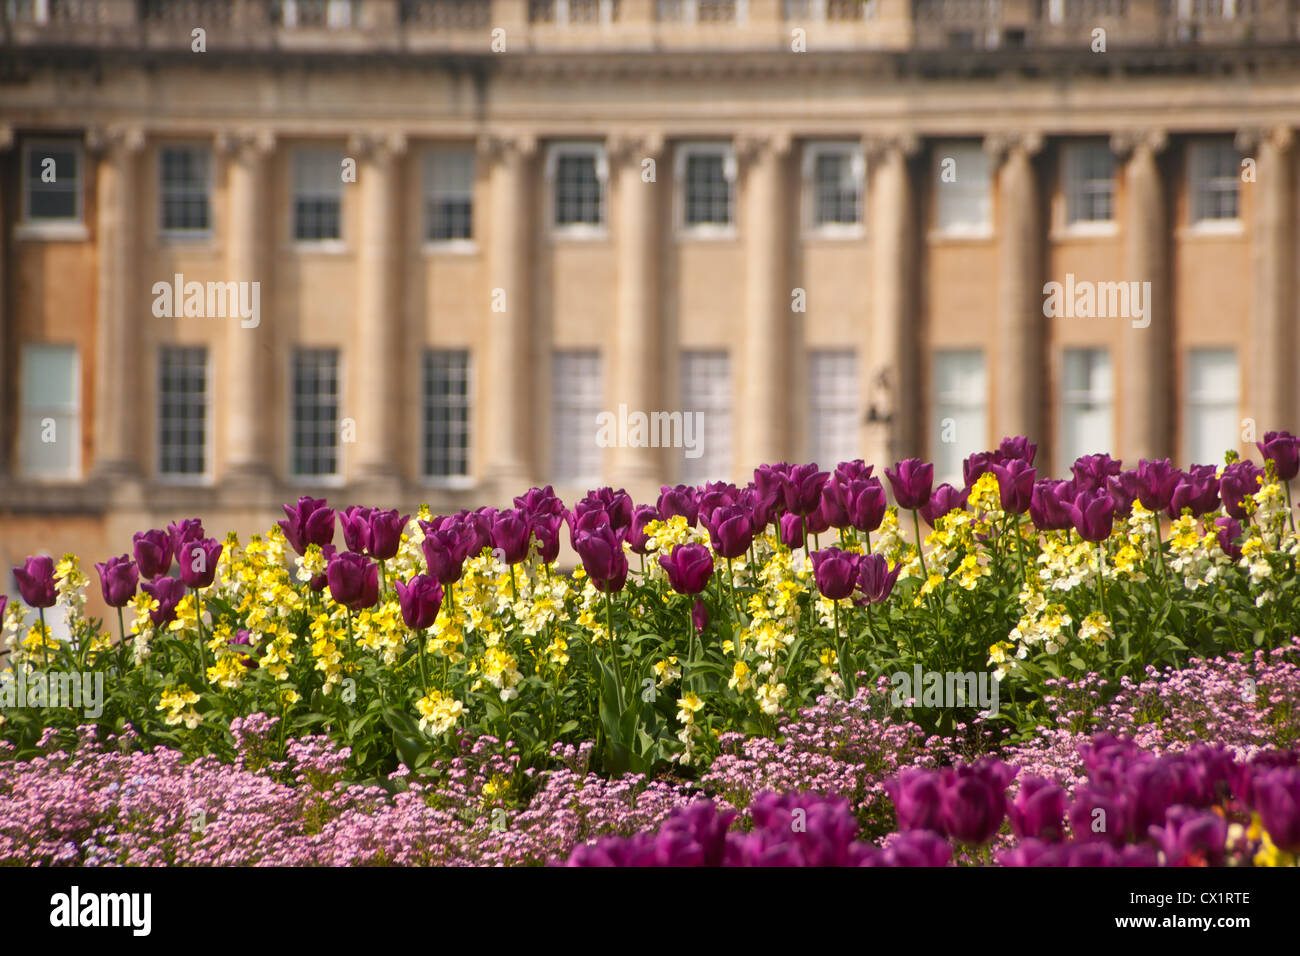 Royal Crescent with tulips in foreground Bath Somerset England UK Stock Photo